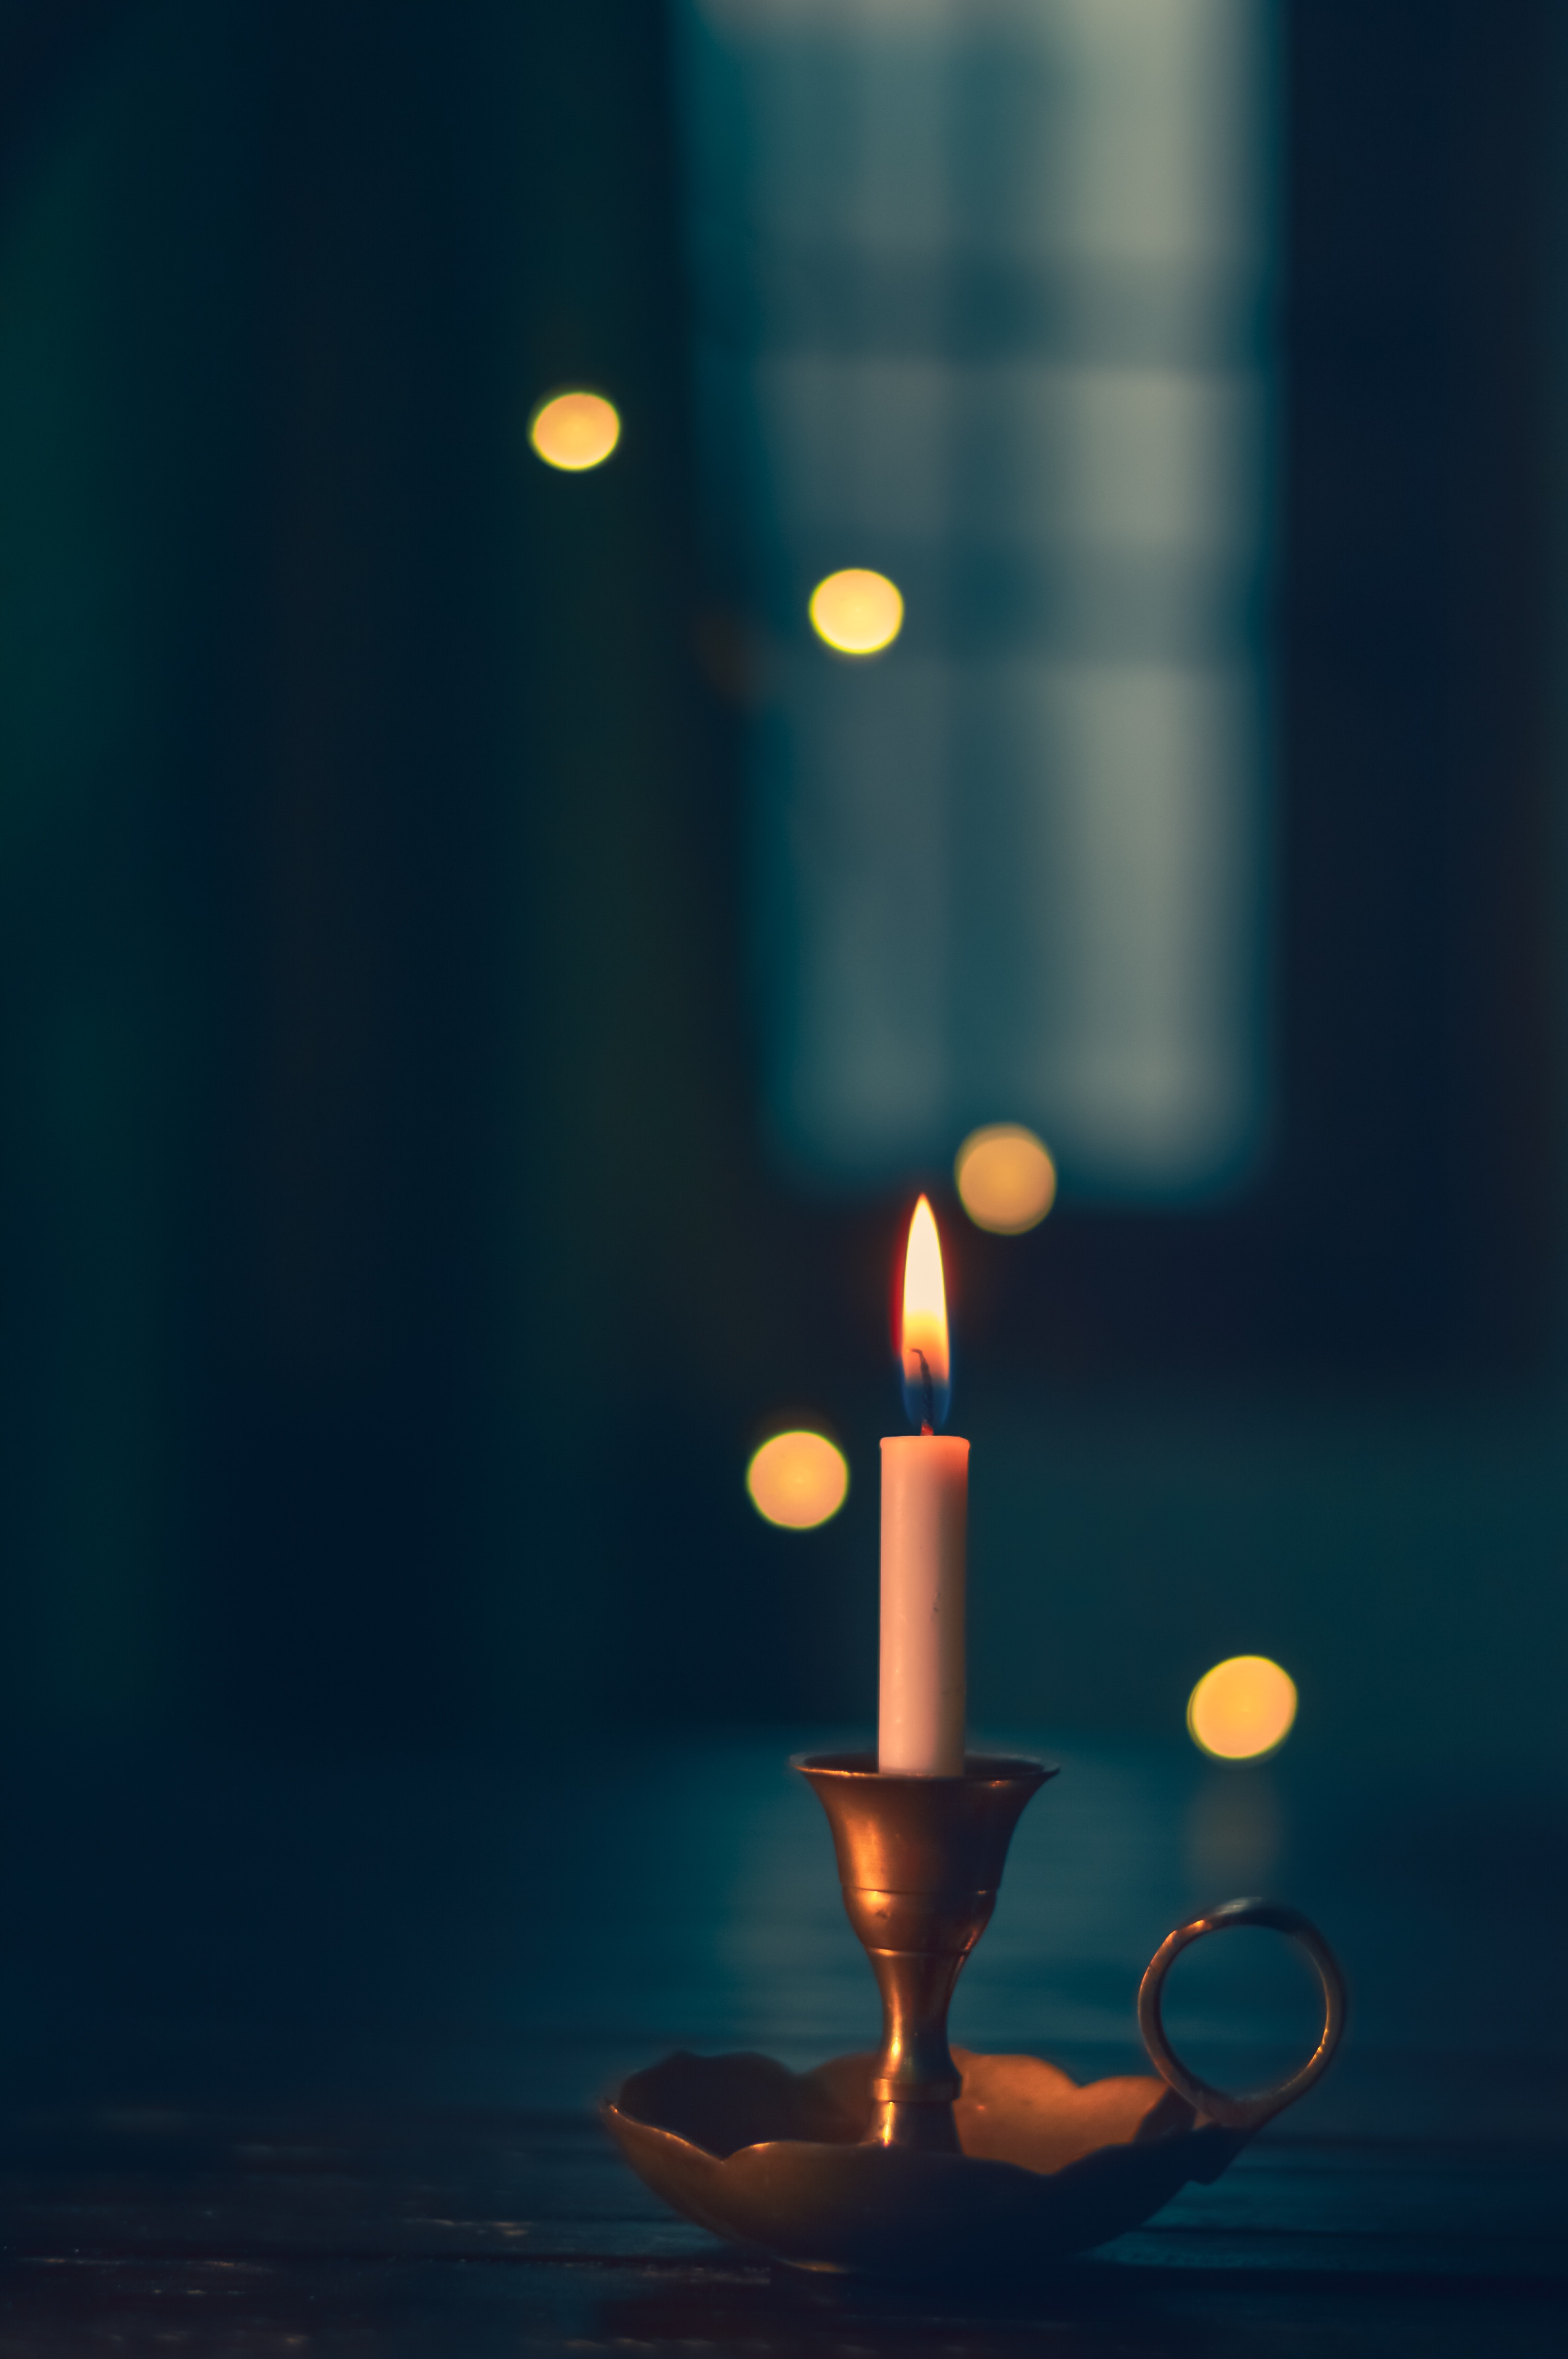 blur, candlestick, miscellanea, candle, wick, wax, fire, miscellaneous, smooth